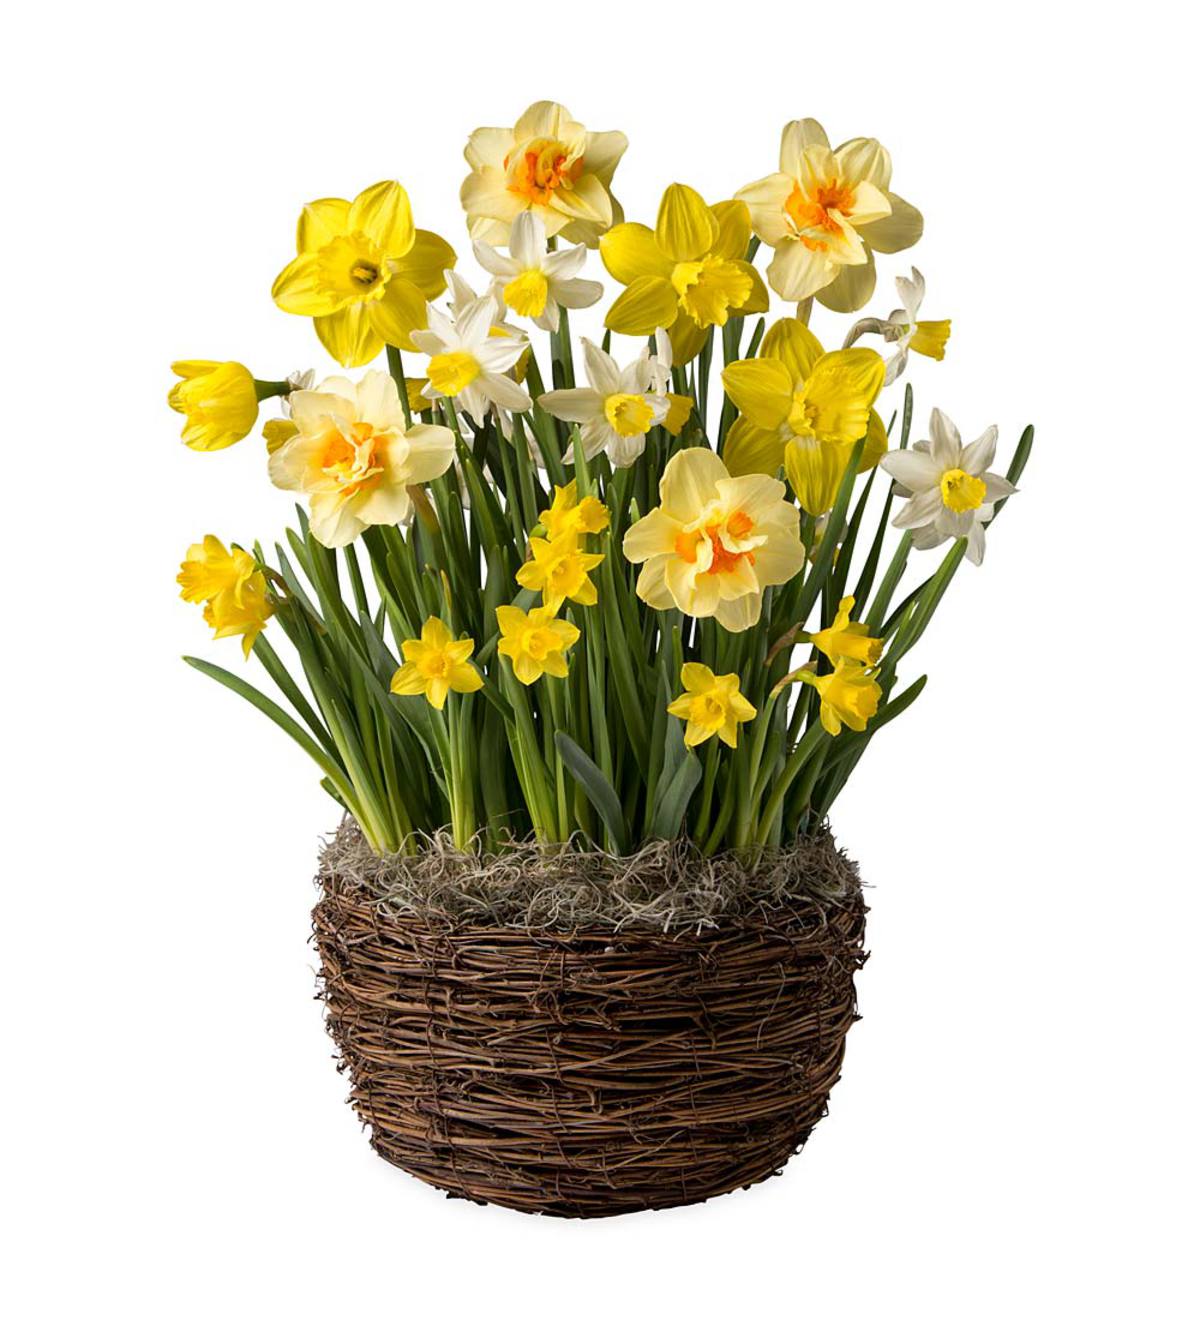 Narcissus Variety Bulb Garden - Ships January-June 2017 | Wind and Weather